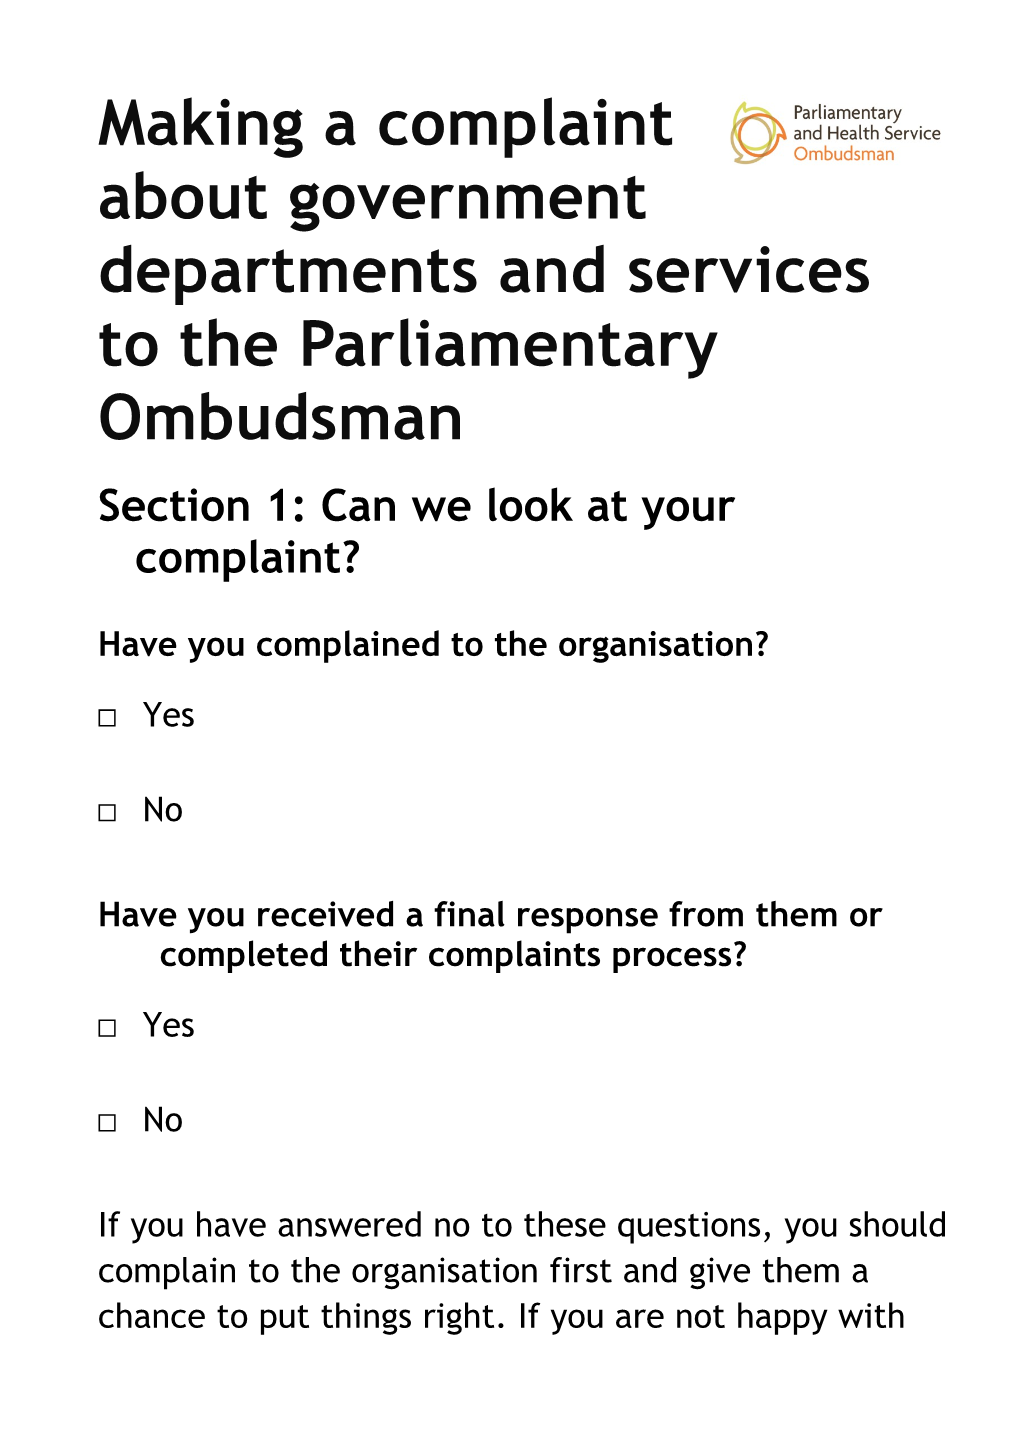 Making a Complaint About Government Departments and Services to the Parliamentary Ombudsman